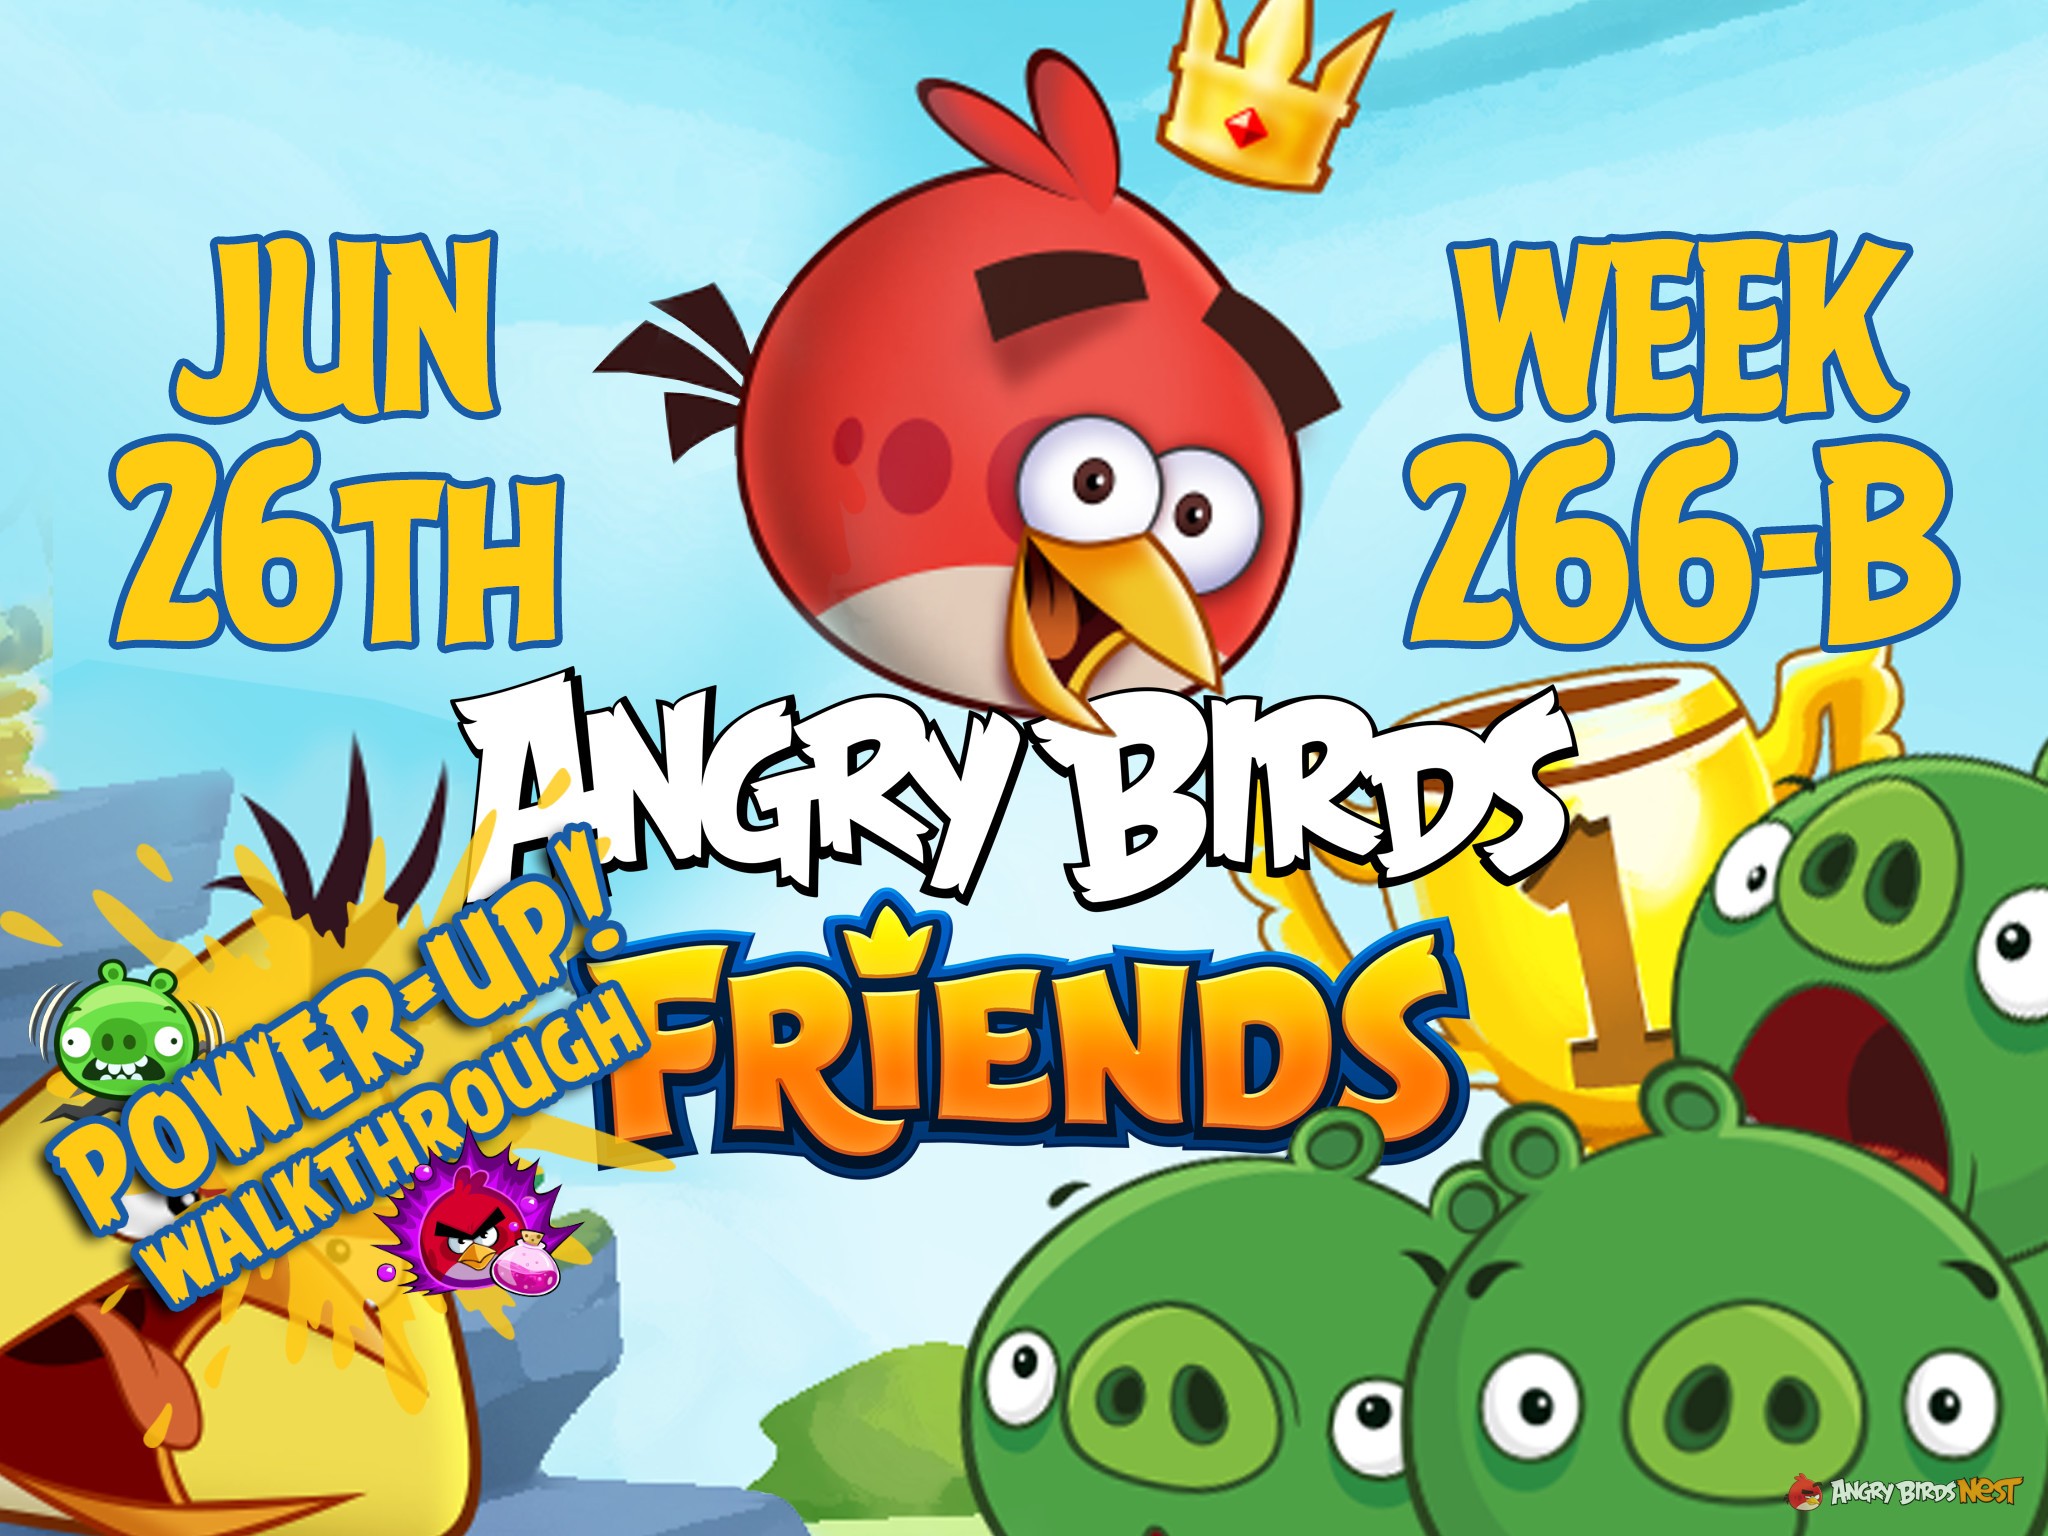 Angry Birds Friends Tournament Week 266-B Feature Image PU